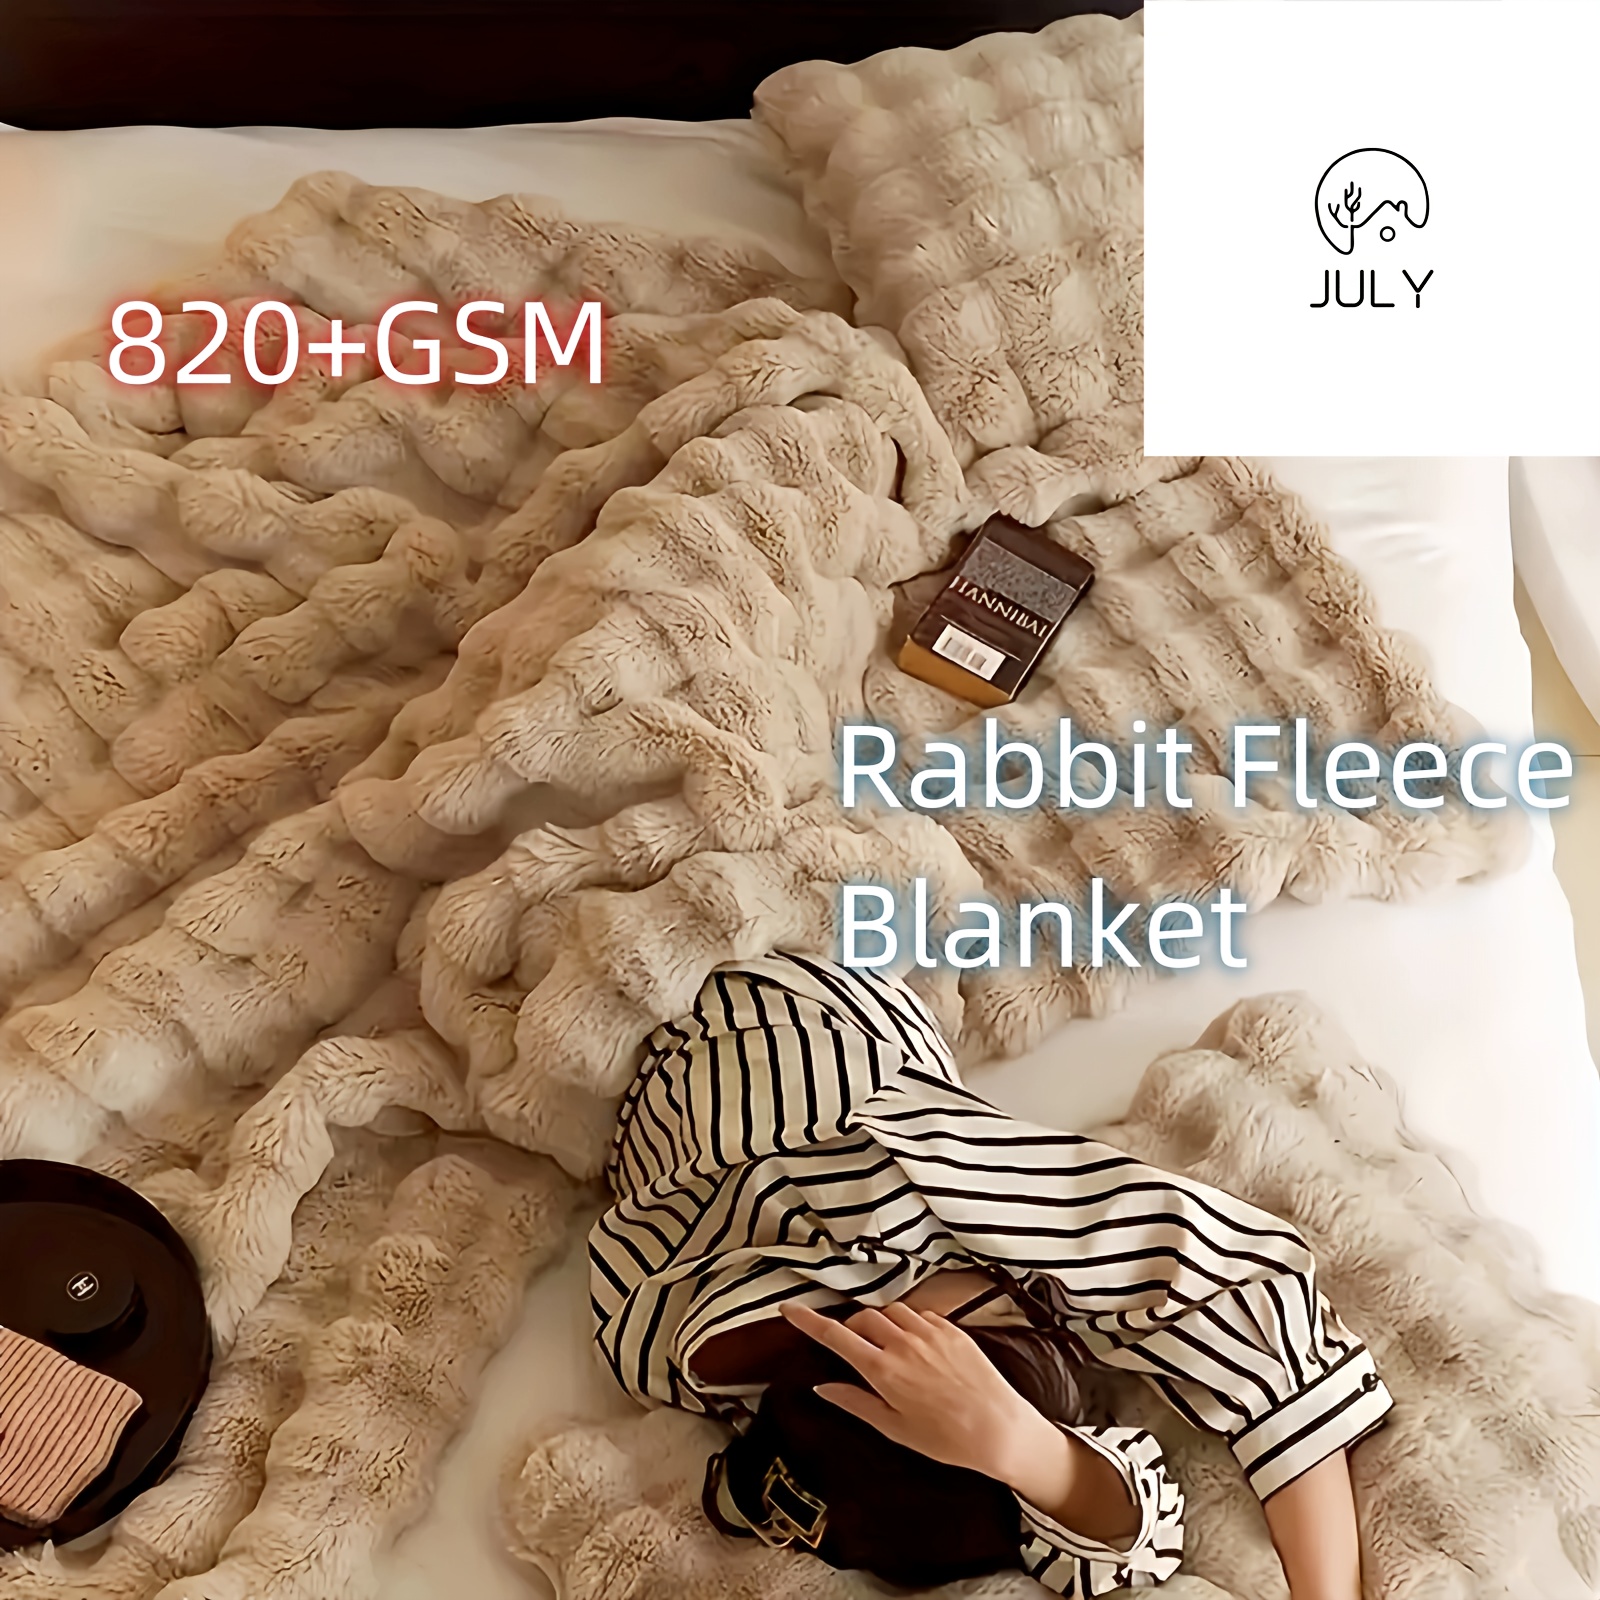 

1pc Rabbit Fleece Blanket, Solid Color Faux Fur Plush Blanket, Soft Warm Throw Blanket Nap Blanket For Couch Sofa Office Bed Camping Travel, Multi-purpose Gift Blanket For All Season